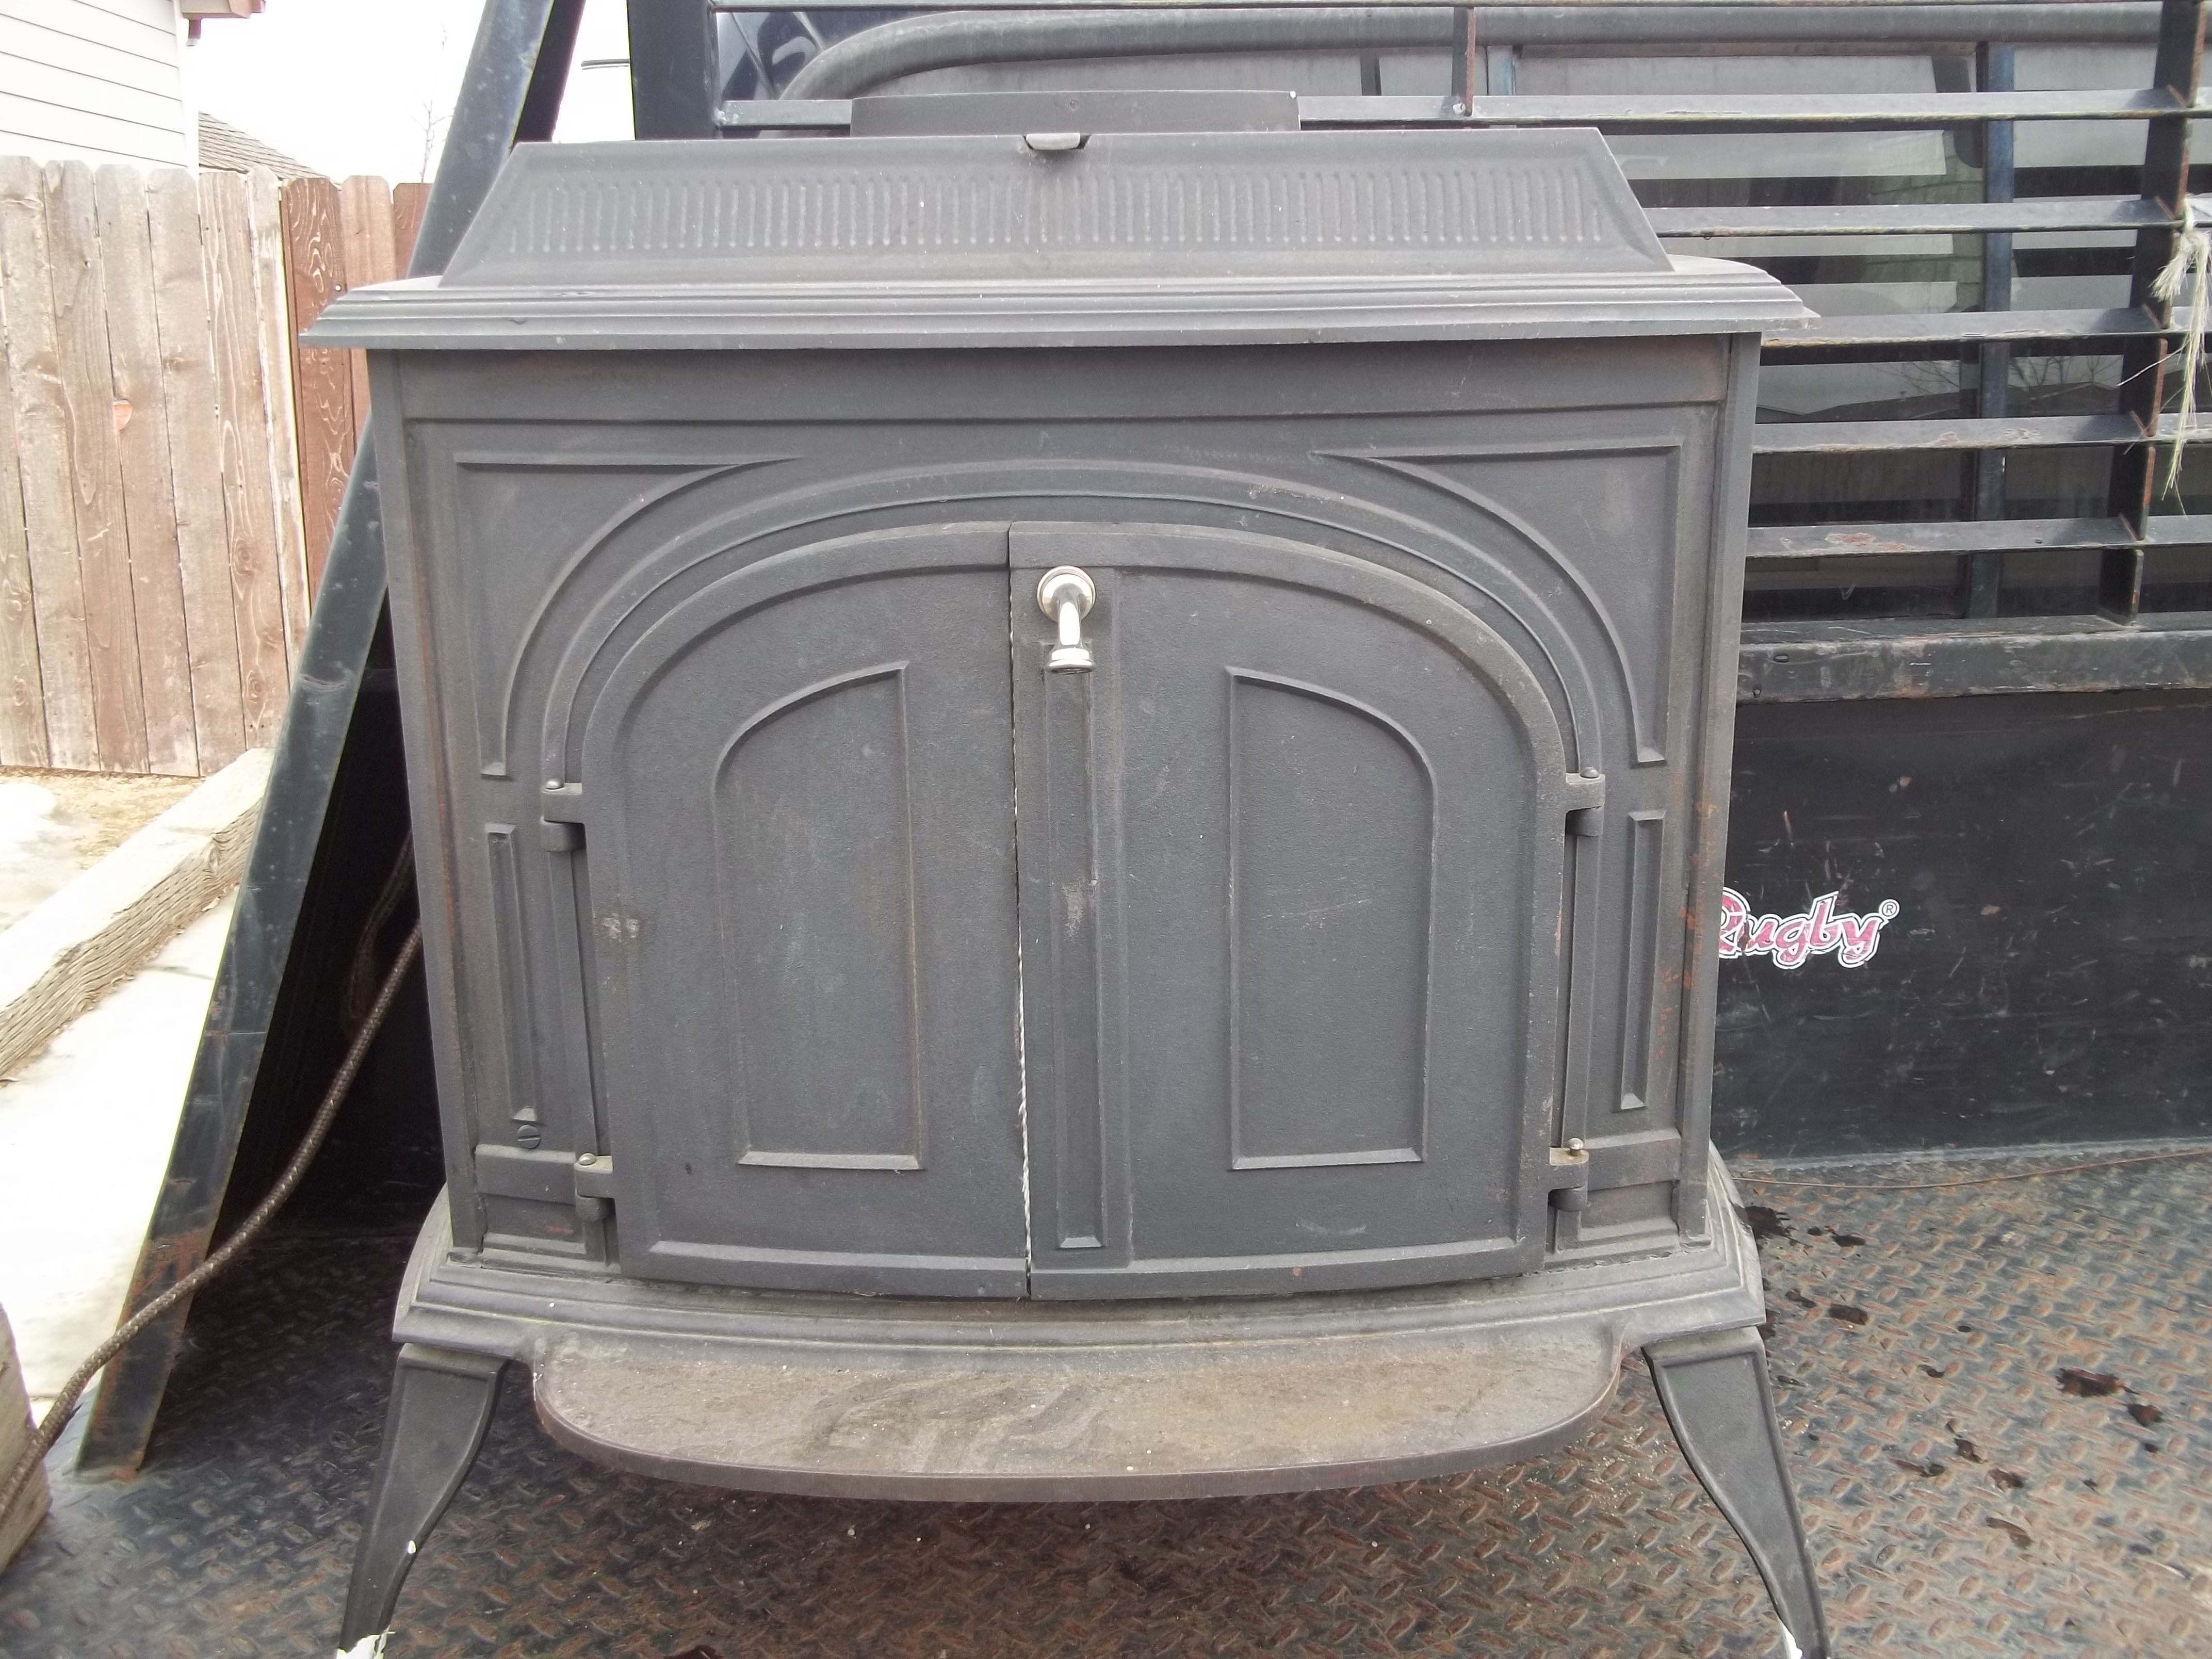 Where can you purchase a Vermont Castings Wood Stove online?